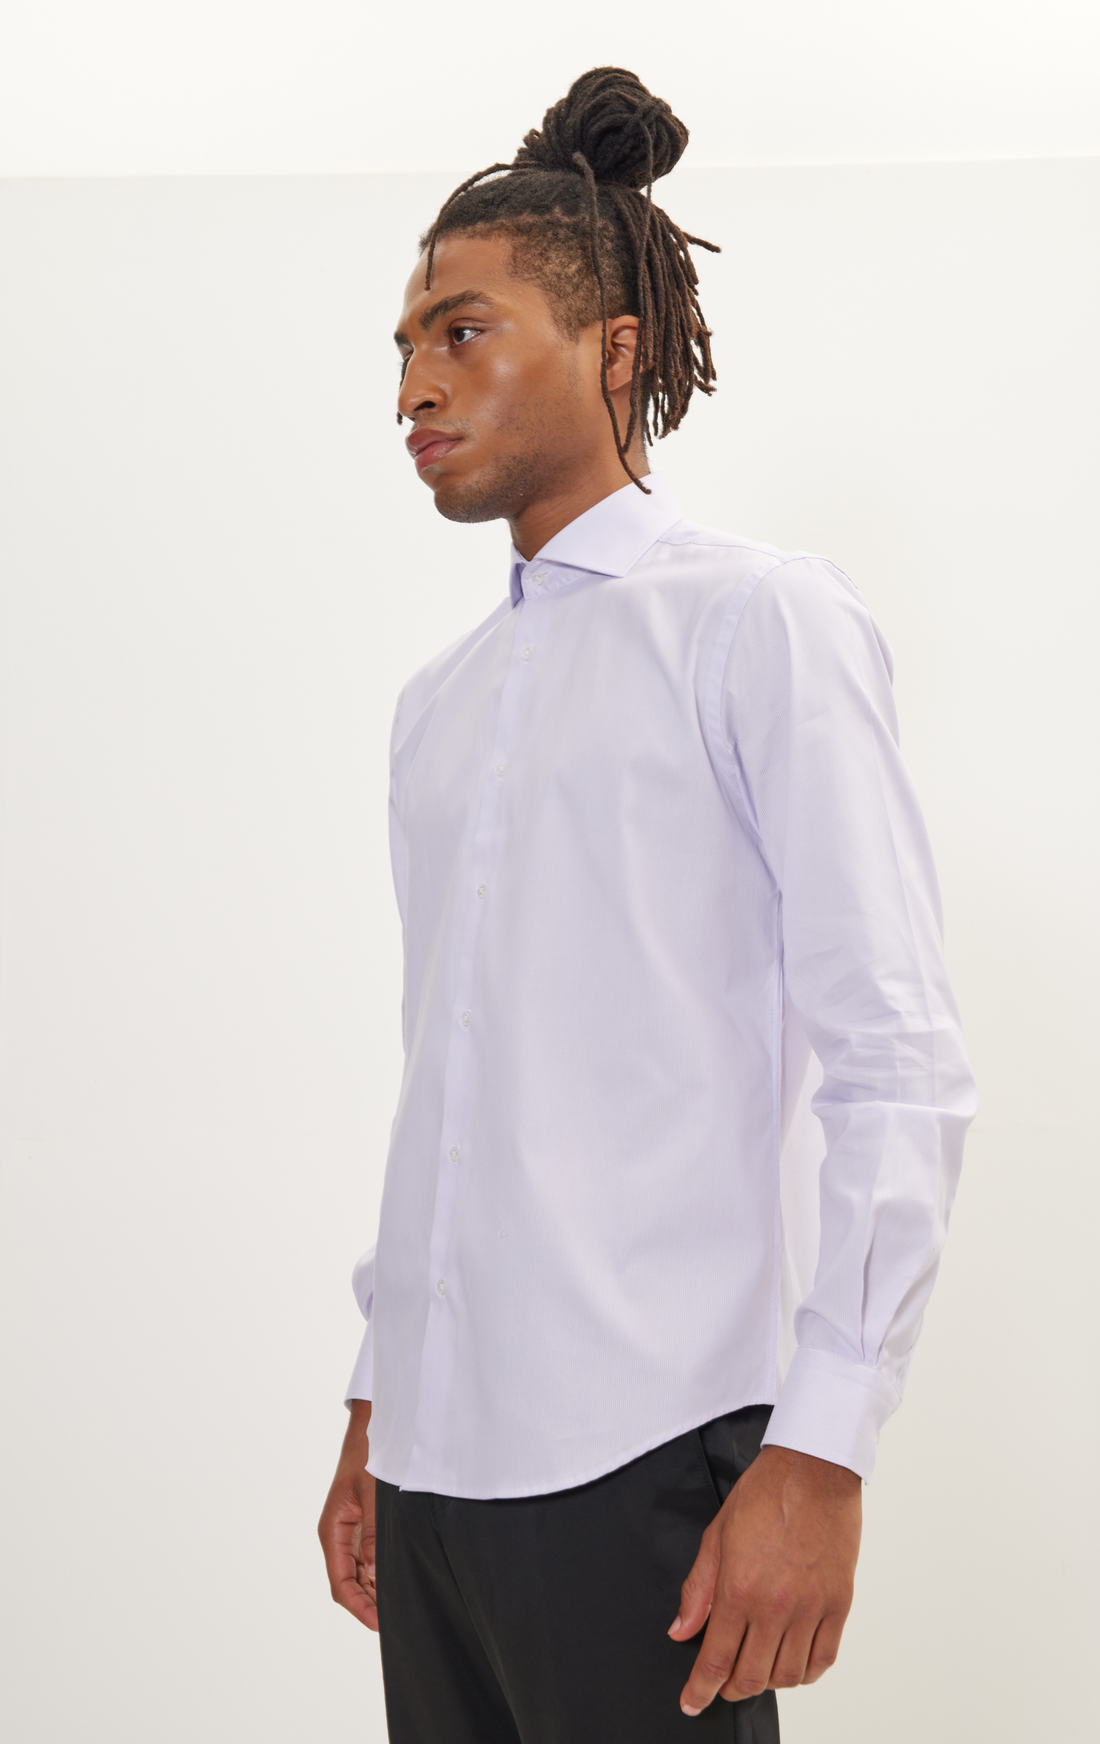 Pure Cotton French Placket Spread Collar Dress Shirt - Lilac Twill